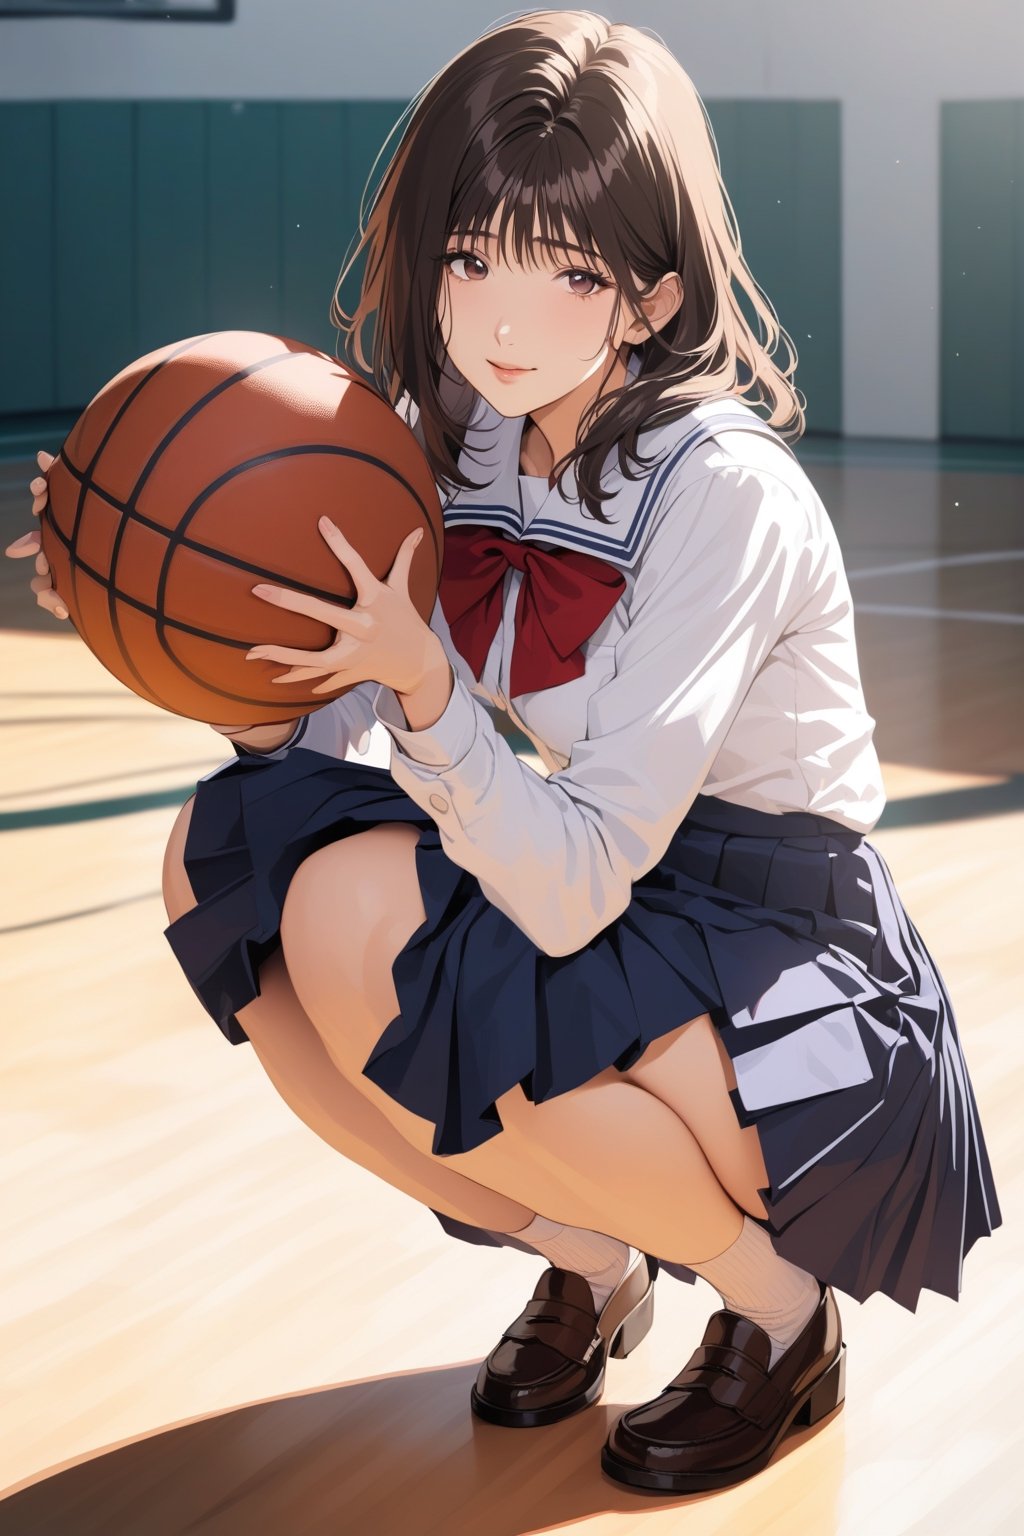 score_9, score_8_up, score_7_up, score_6_up, rating_explicit, masterpiece, best quality, beautiful lighting, haruk0akagi, navy school uniform, skirt, brown hair, pleated skirt, long sleeves, red bow, basketball court, indoor, squatting on court, holding basketball, light smile, lookin at viewer, 